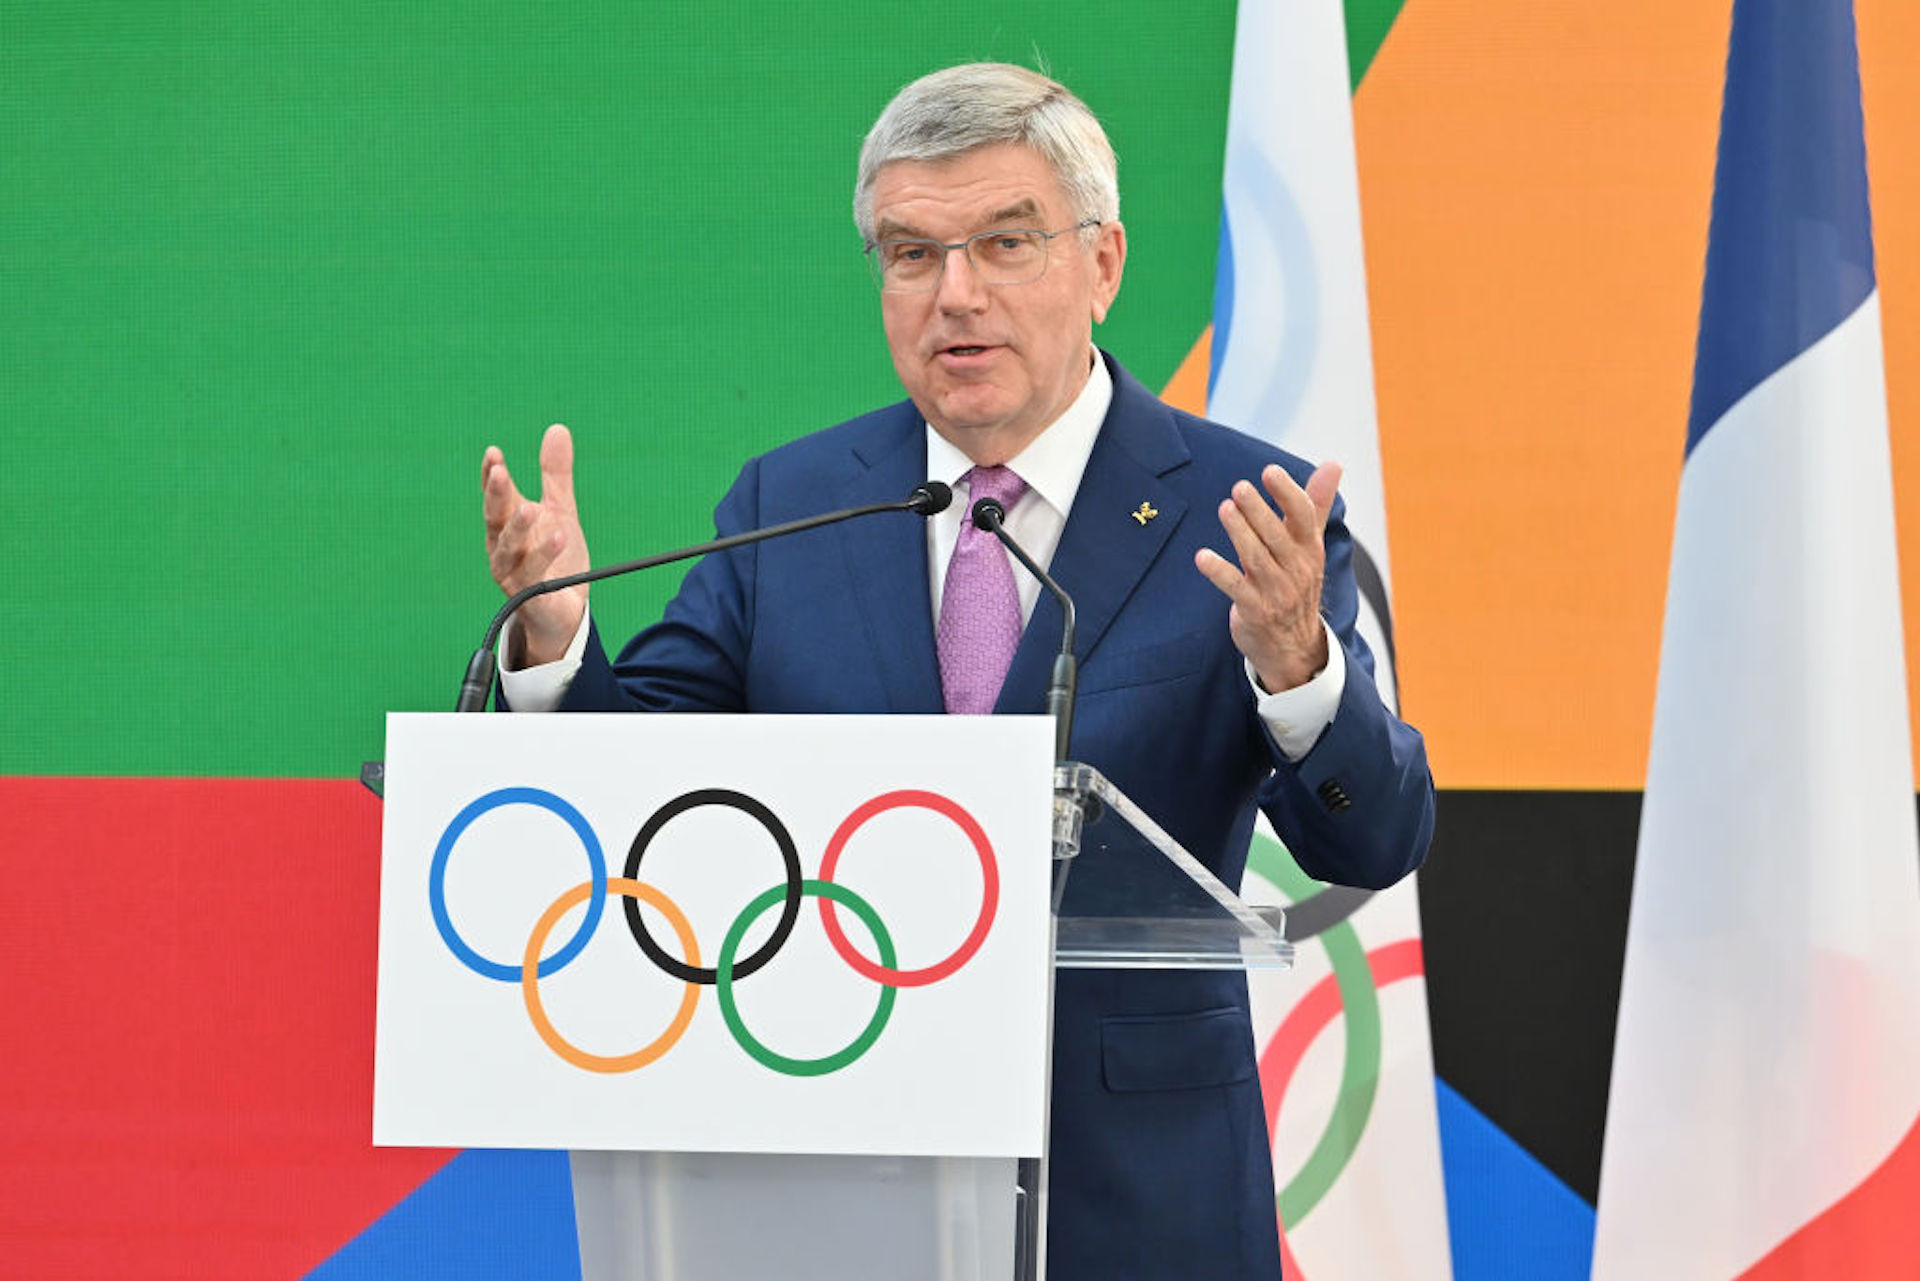 Thomas Bach, president of the IOC, in Paris on 26 July. GETTY IMAGES